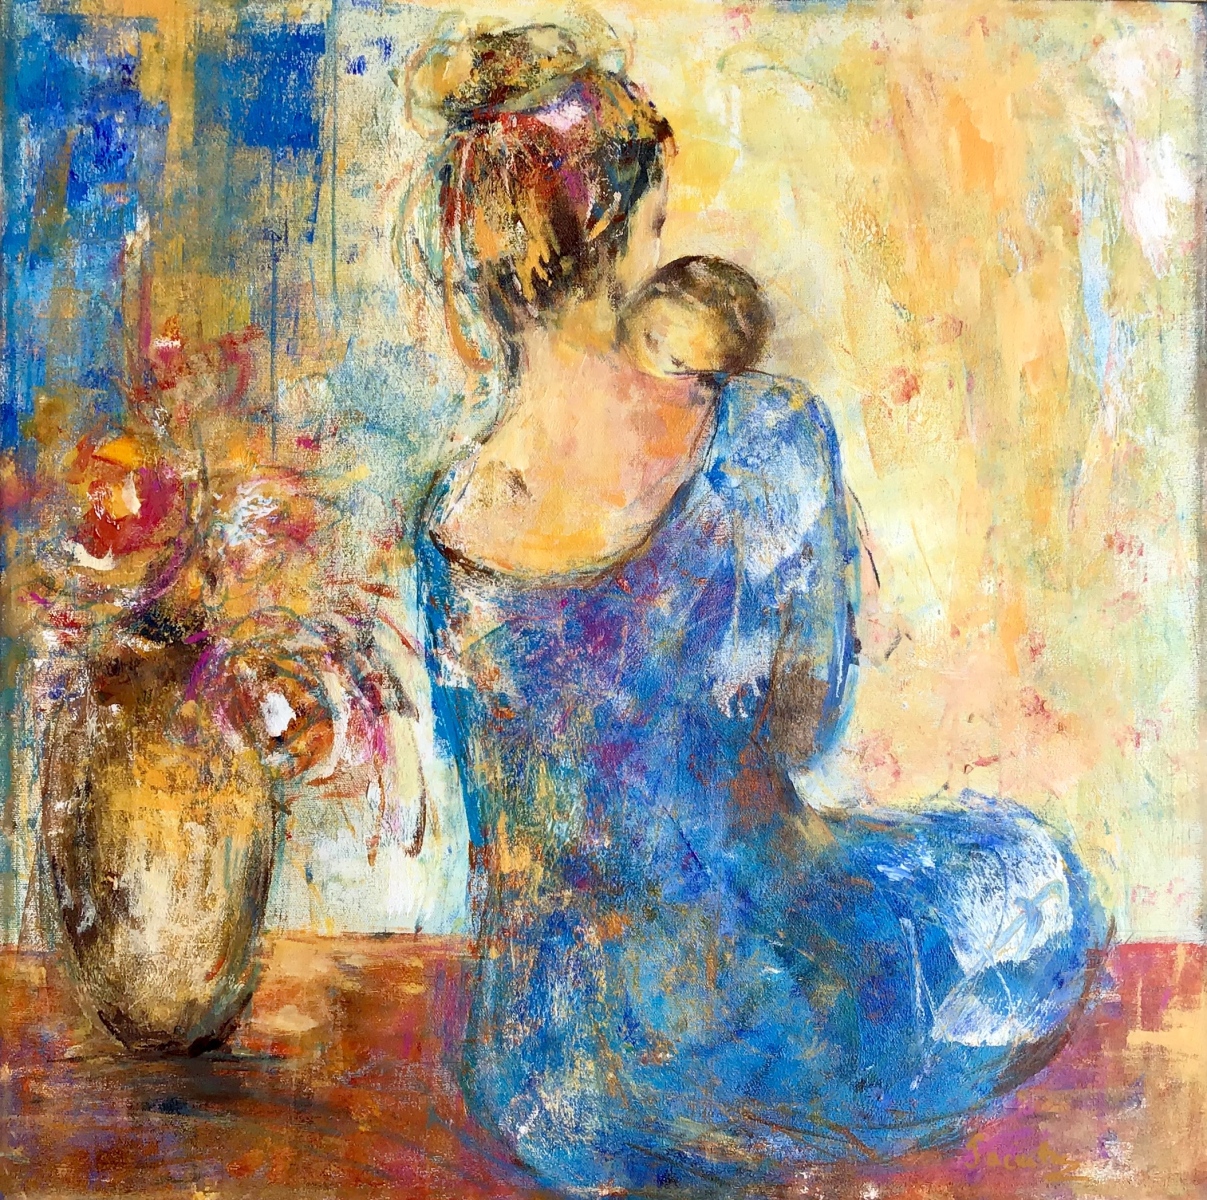 SOLD - A TENDER MOMENT